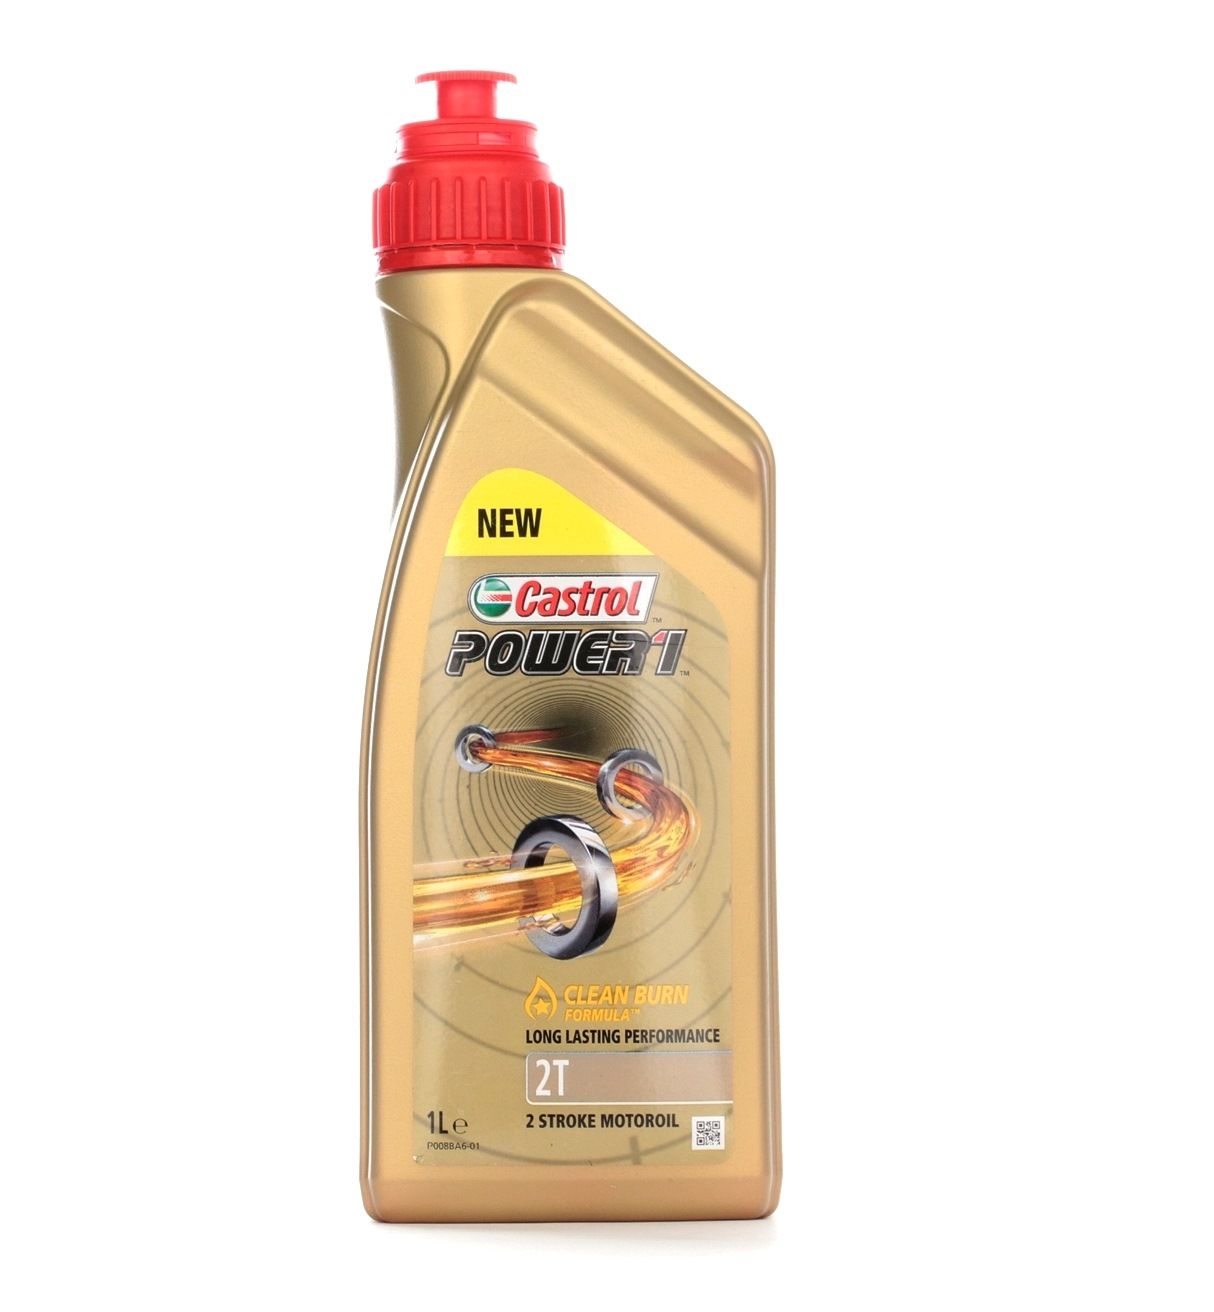 CASTROL Power 1, 2T Huile moteur 1I 15B64B YAMAHA Mobylette Maxi-scooters